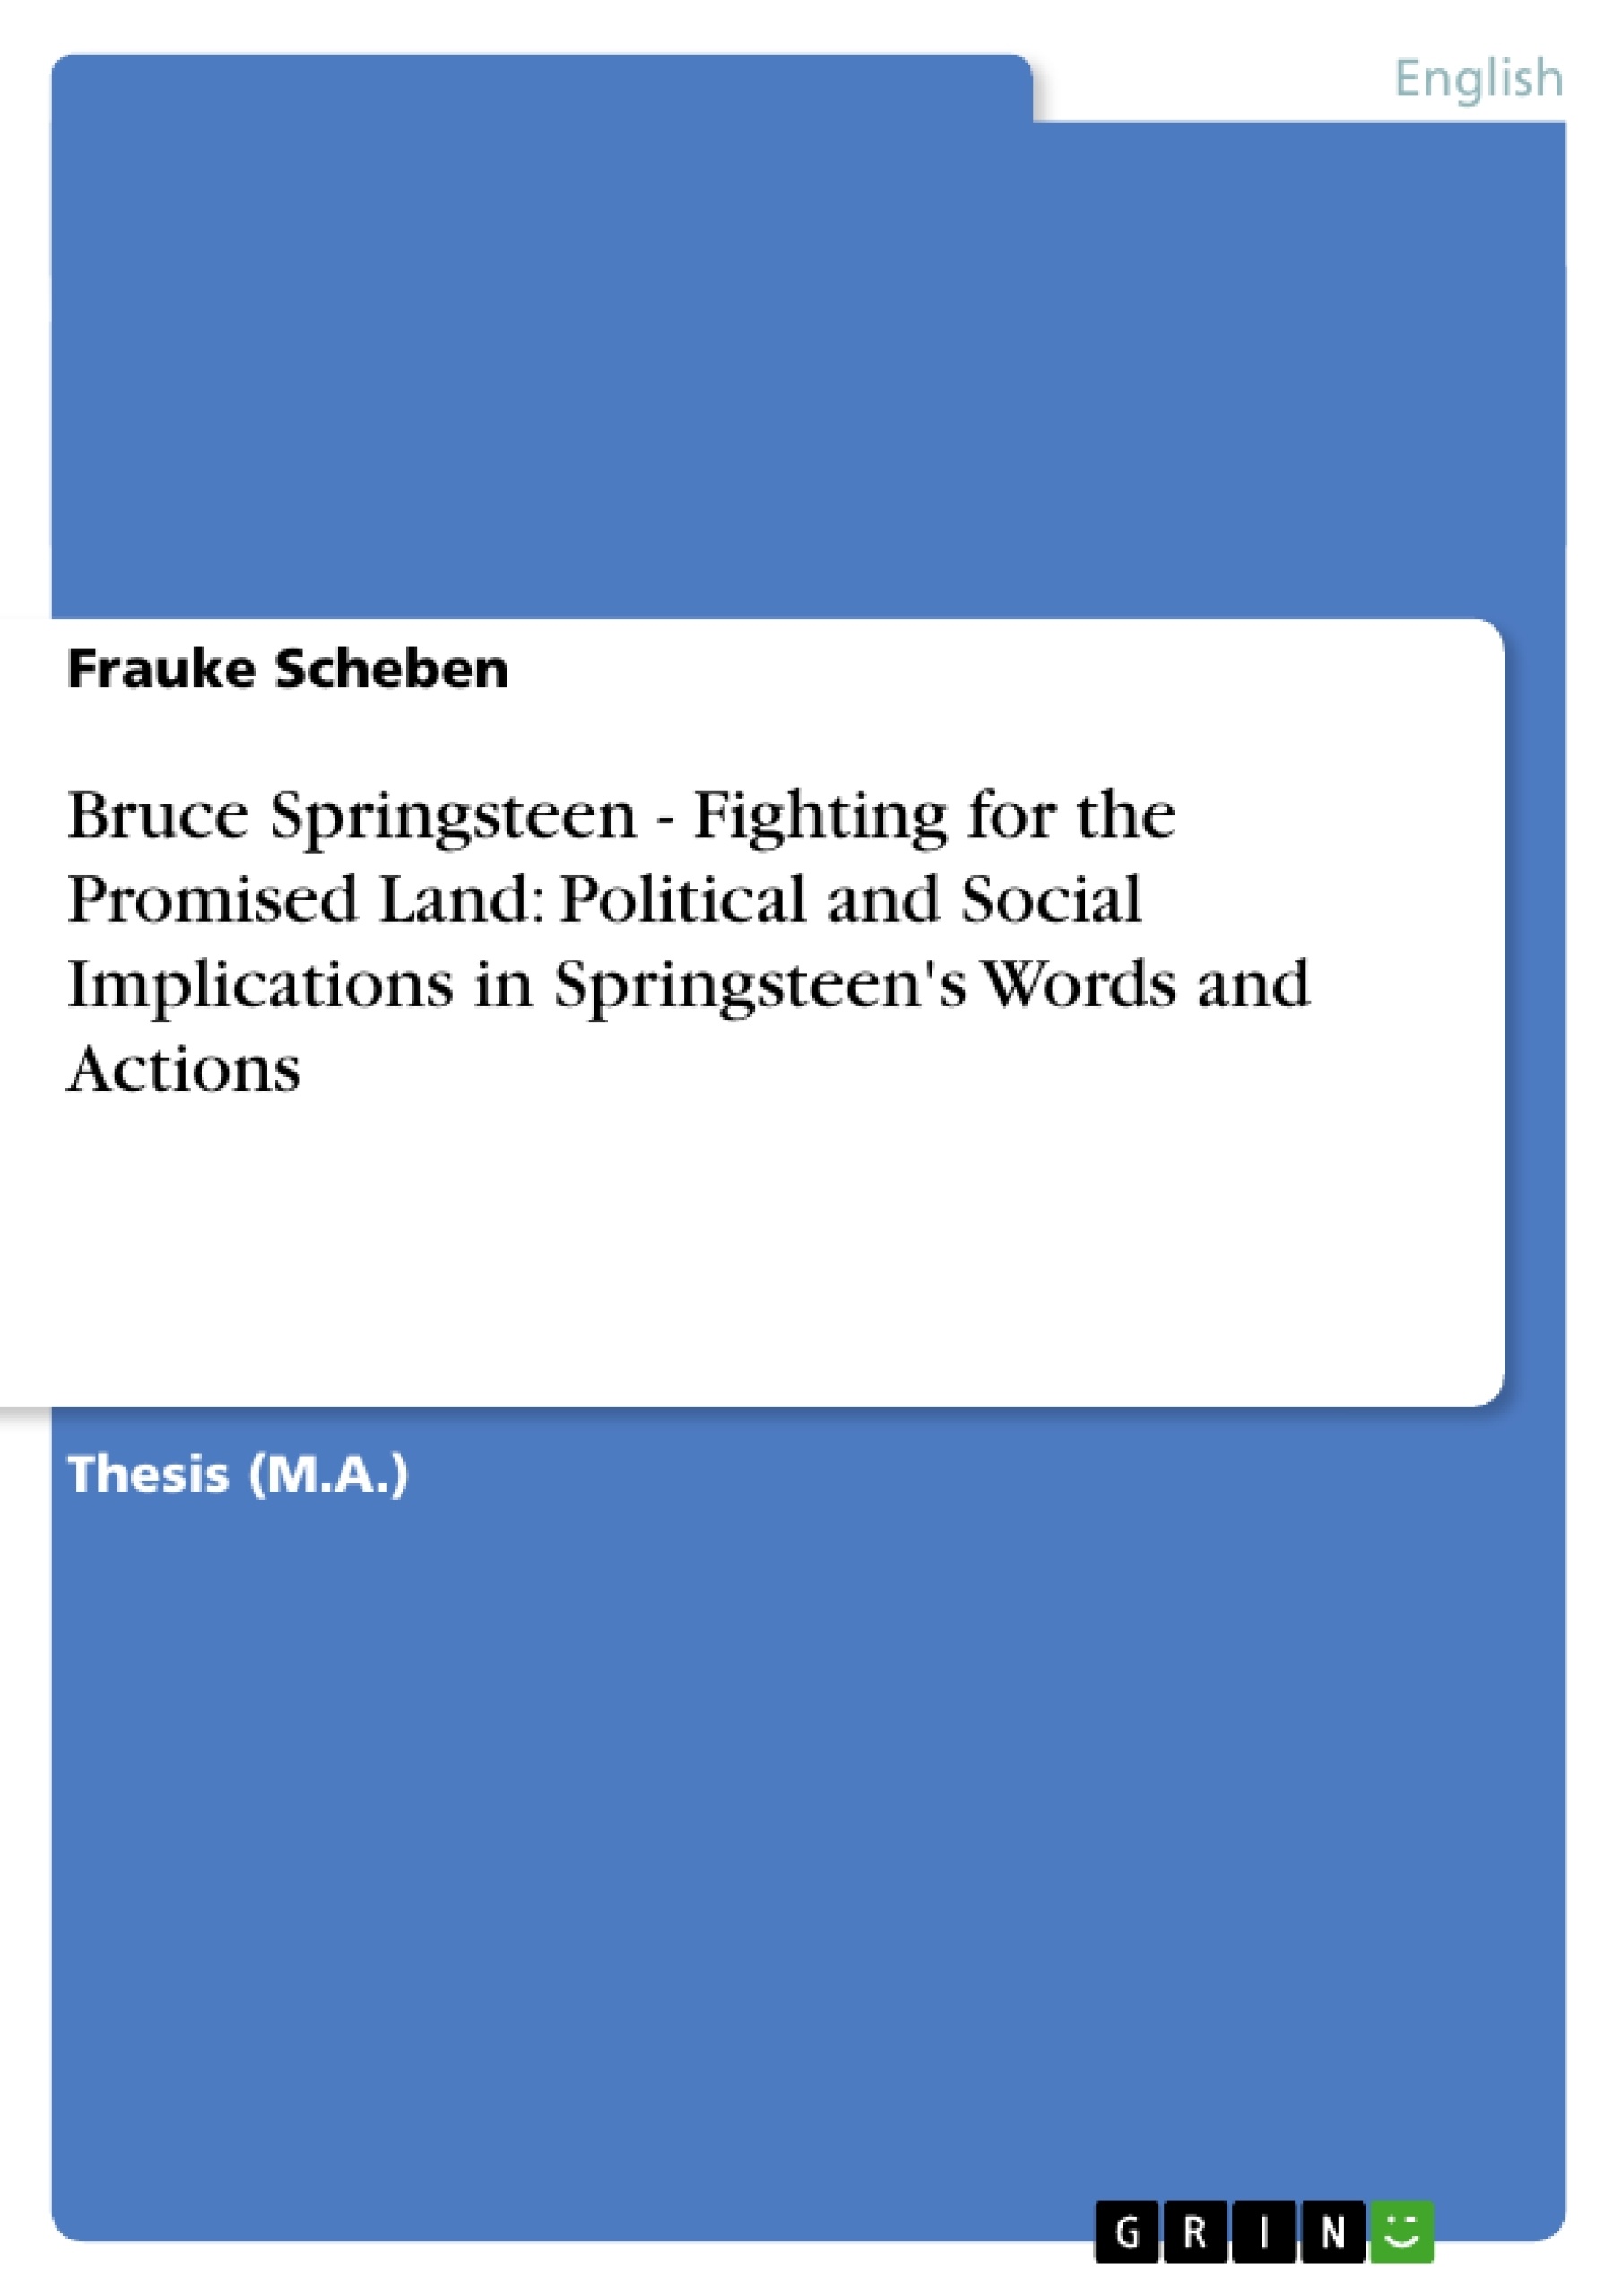 Title: Bruce Springsteen - Fighting for the Promised Land: Political and Social Implications in Springsteen's Words and Actions